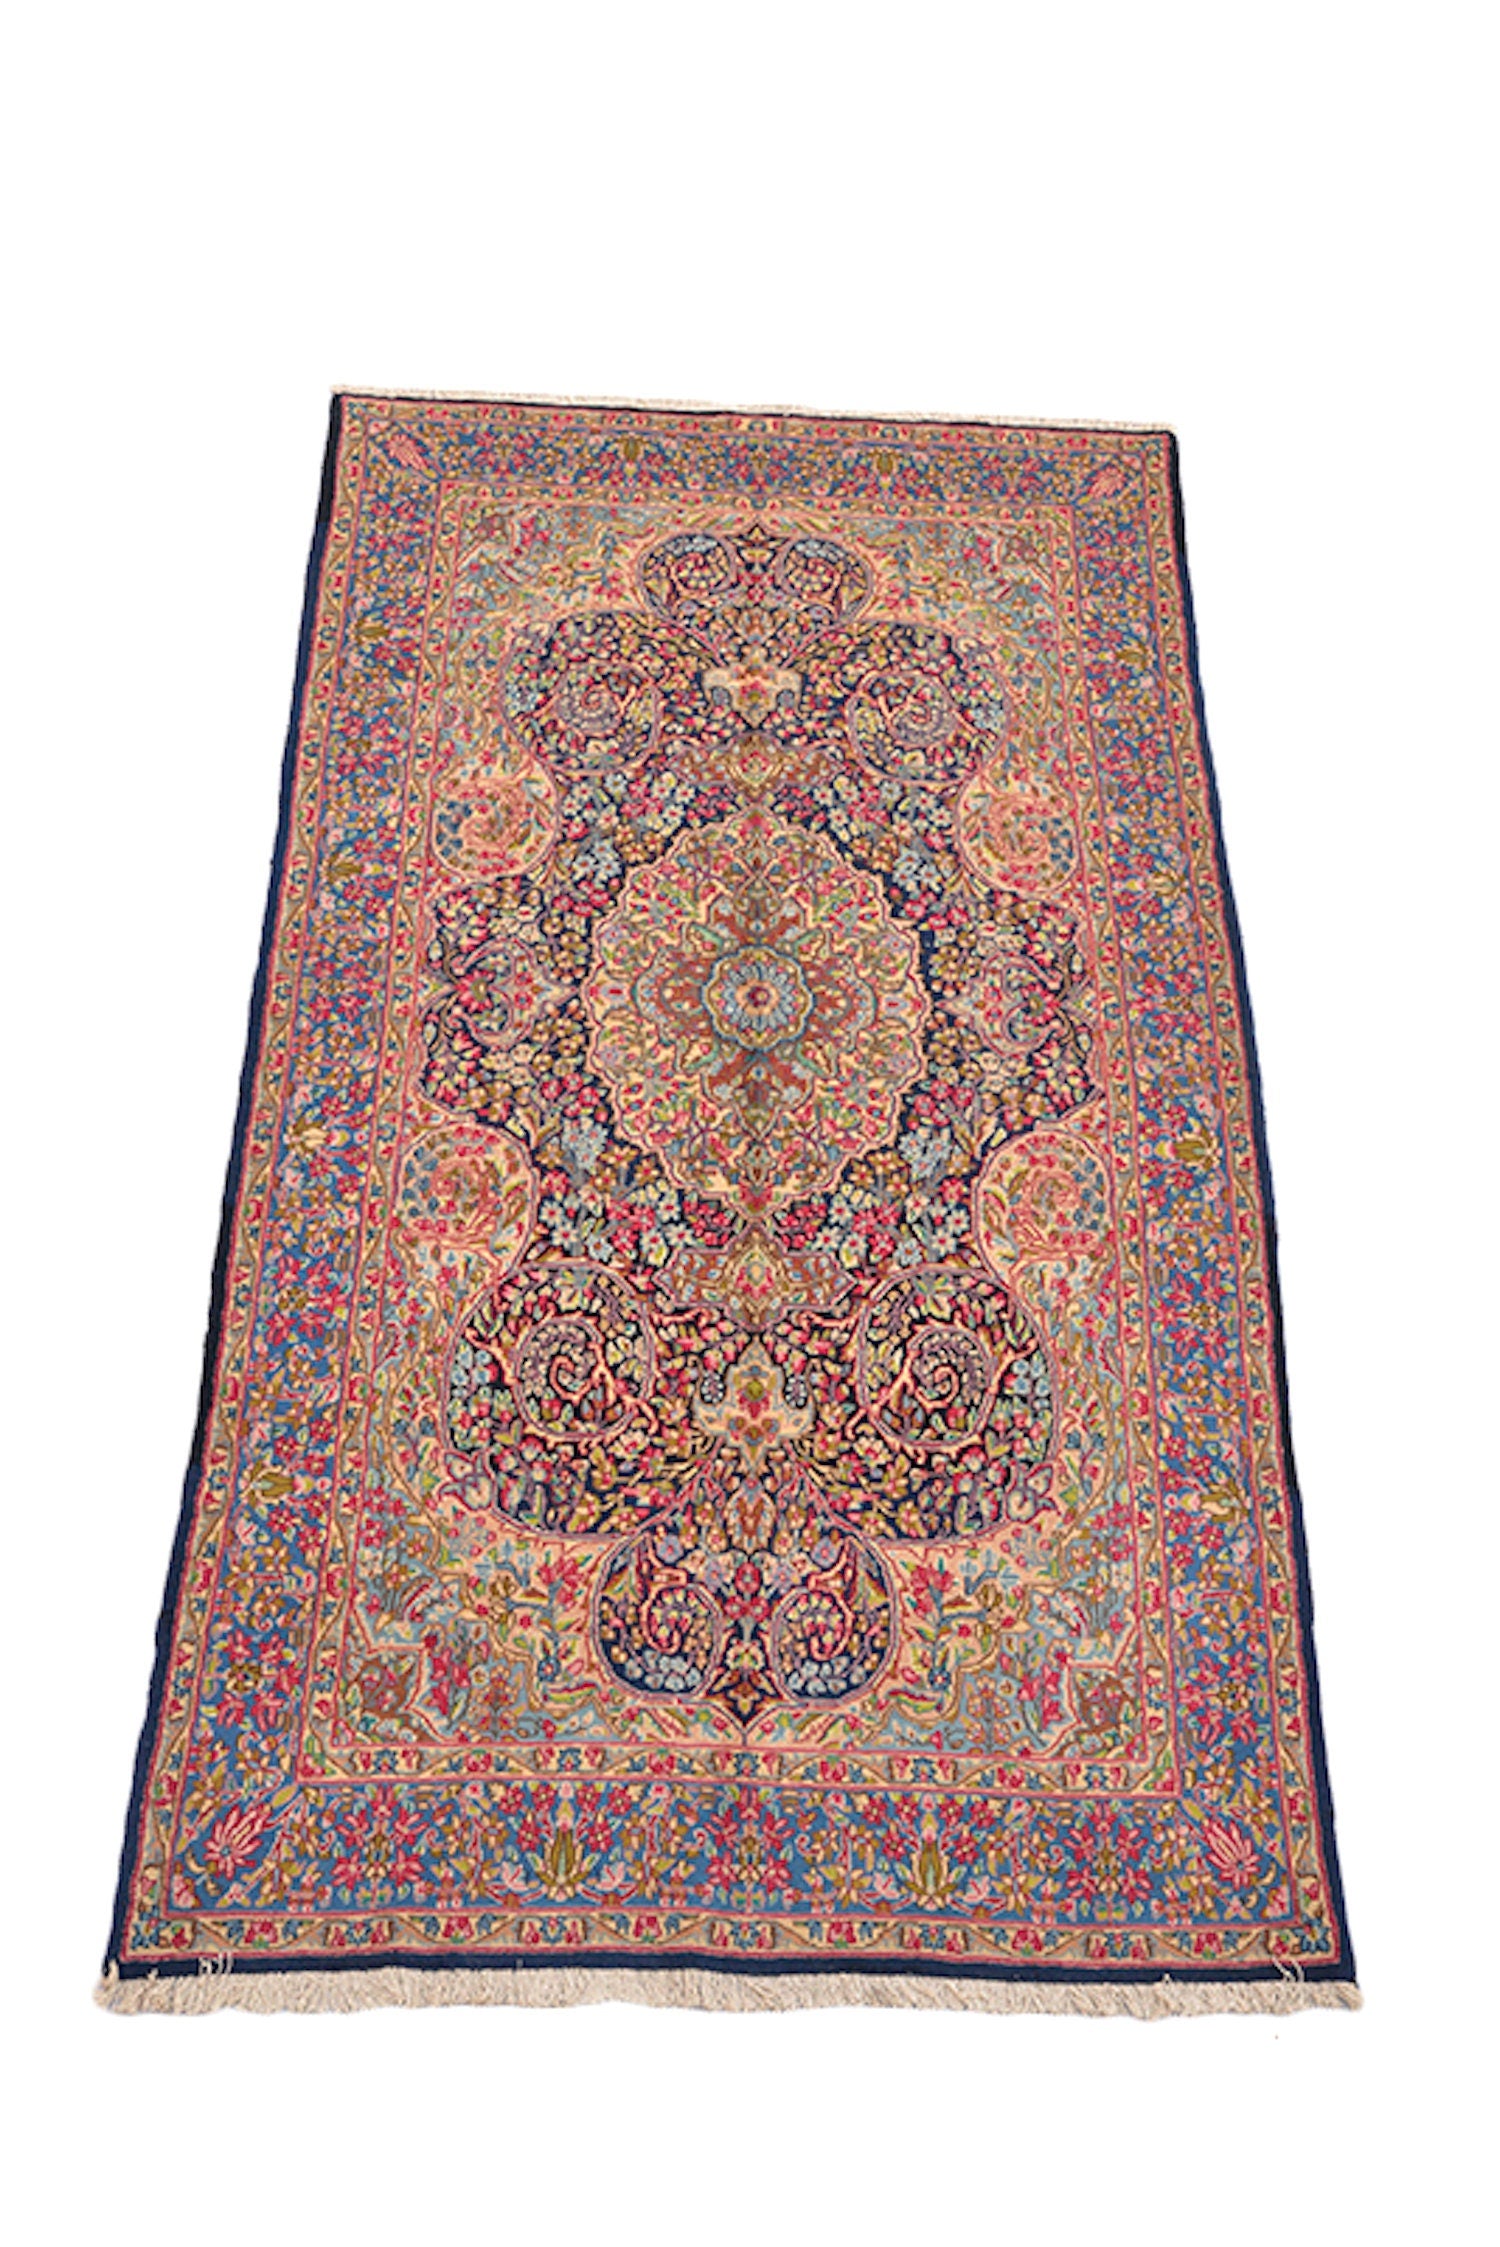 Floral Oriental 5x9 l Rug, Pink Blue, Persian Caucasian Style Rug, Traditional Medallion, Handmade Wool Antique Timeless Rug